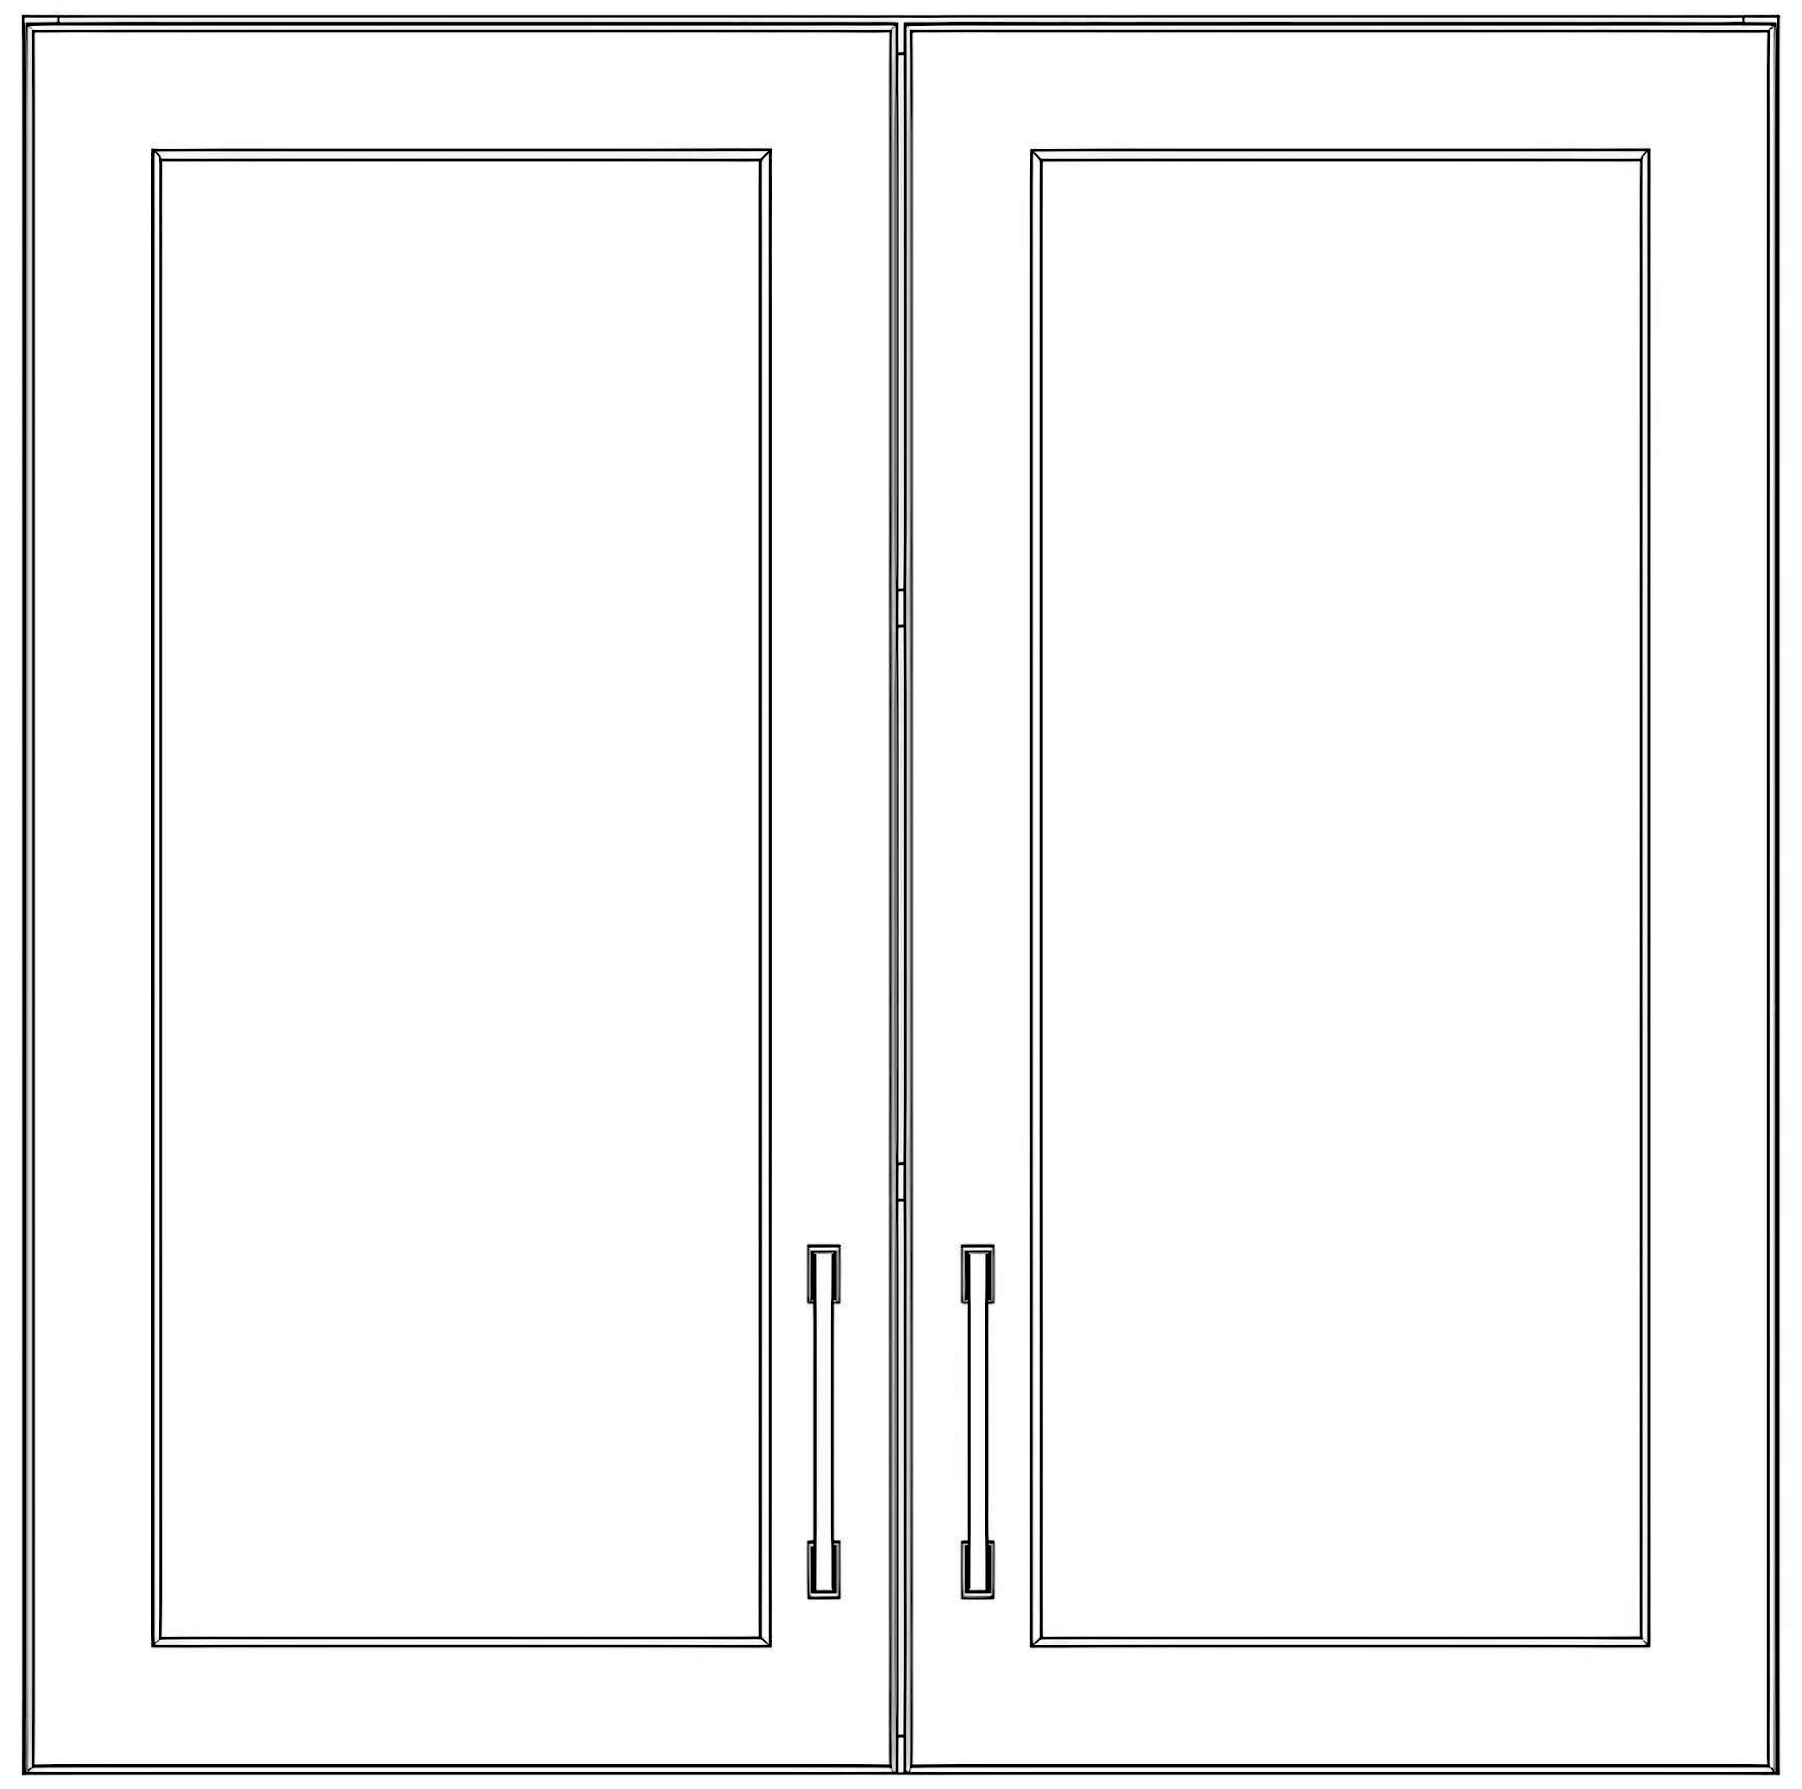 30" High Wall Cabinets - Thermofoil Doors